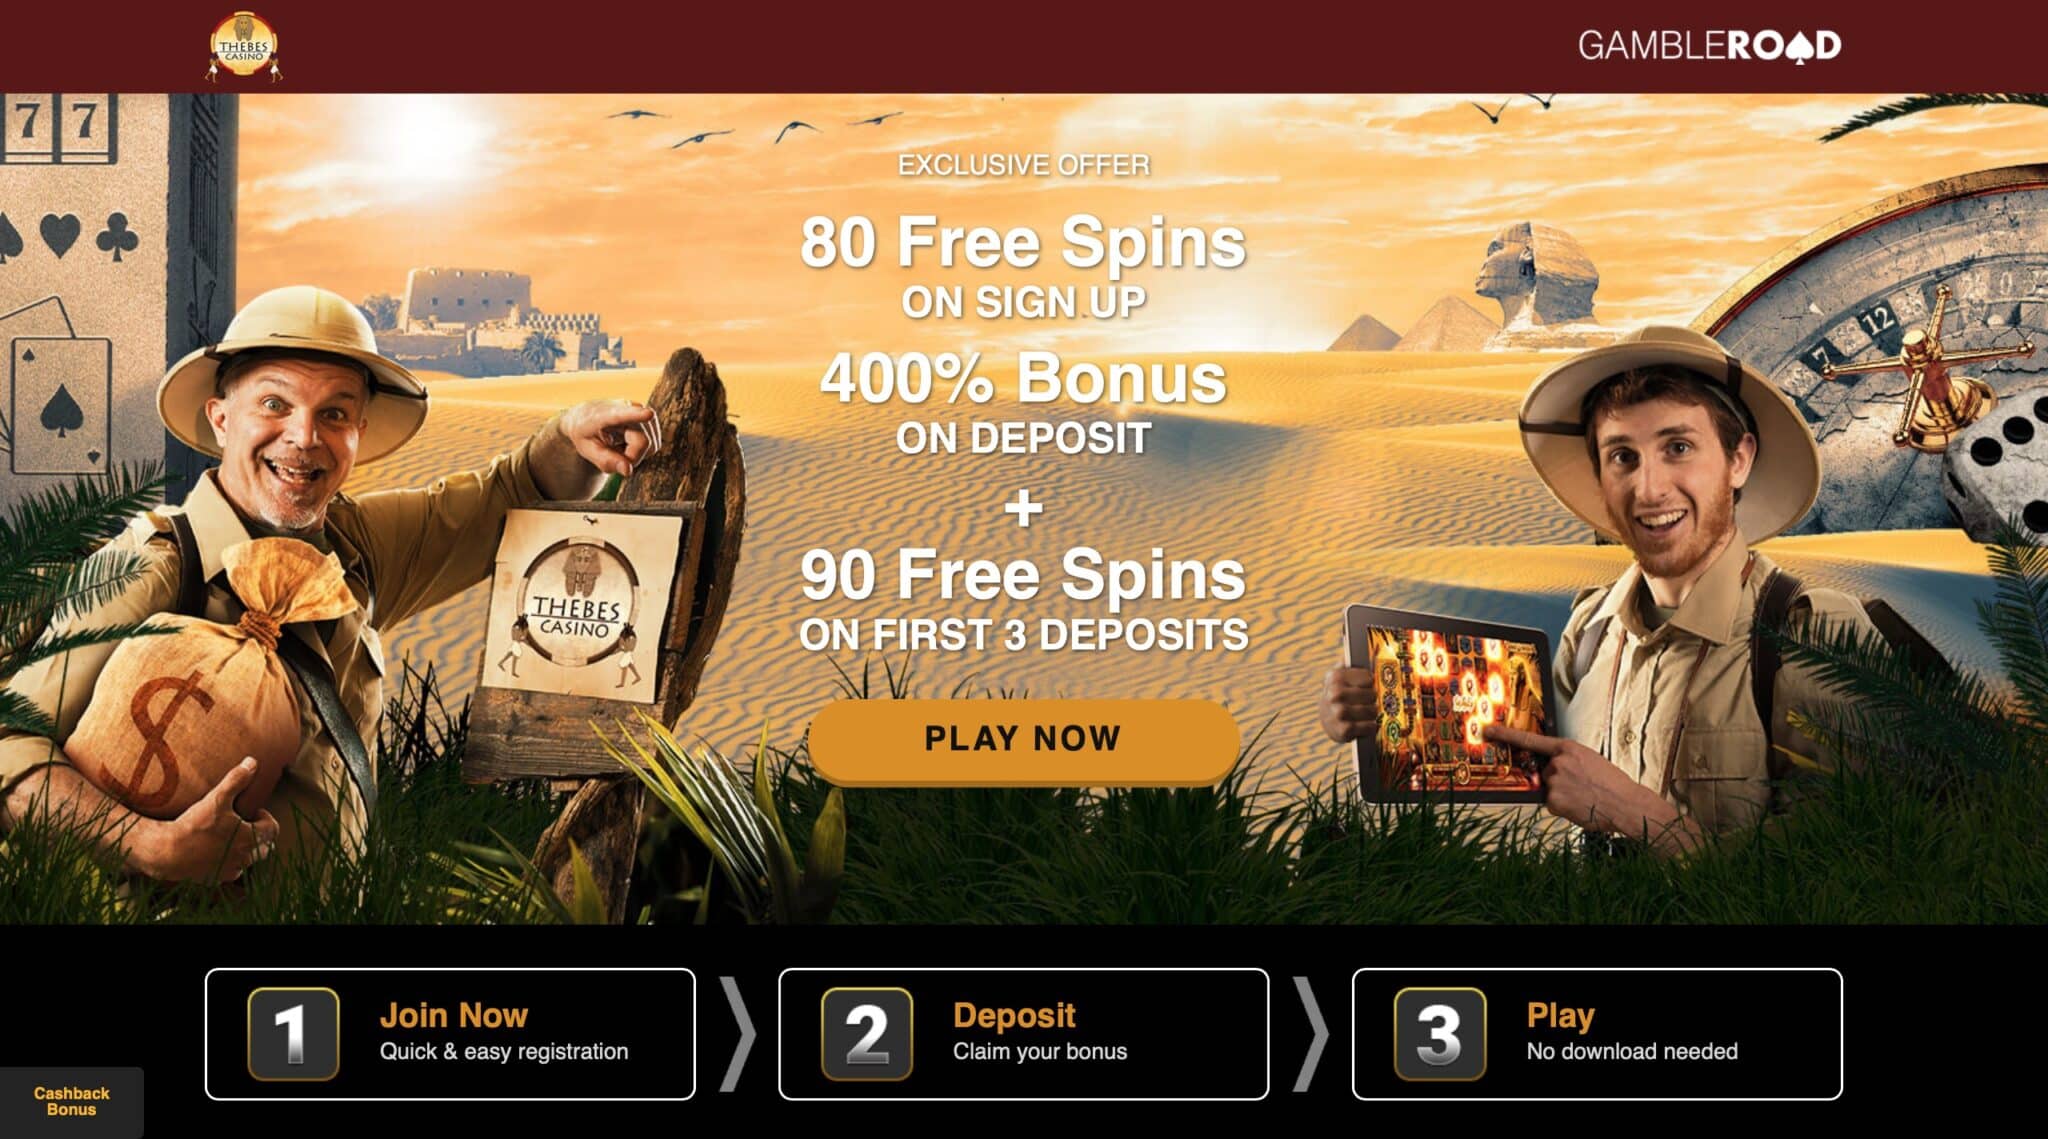 $100 no deposit bonus for new players by Thebes Casino